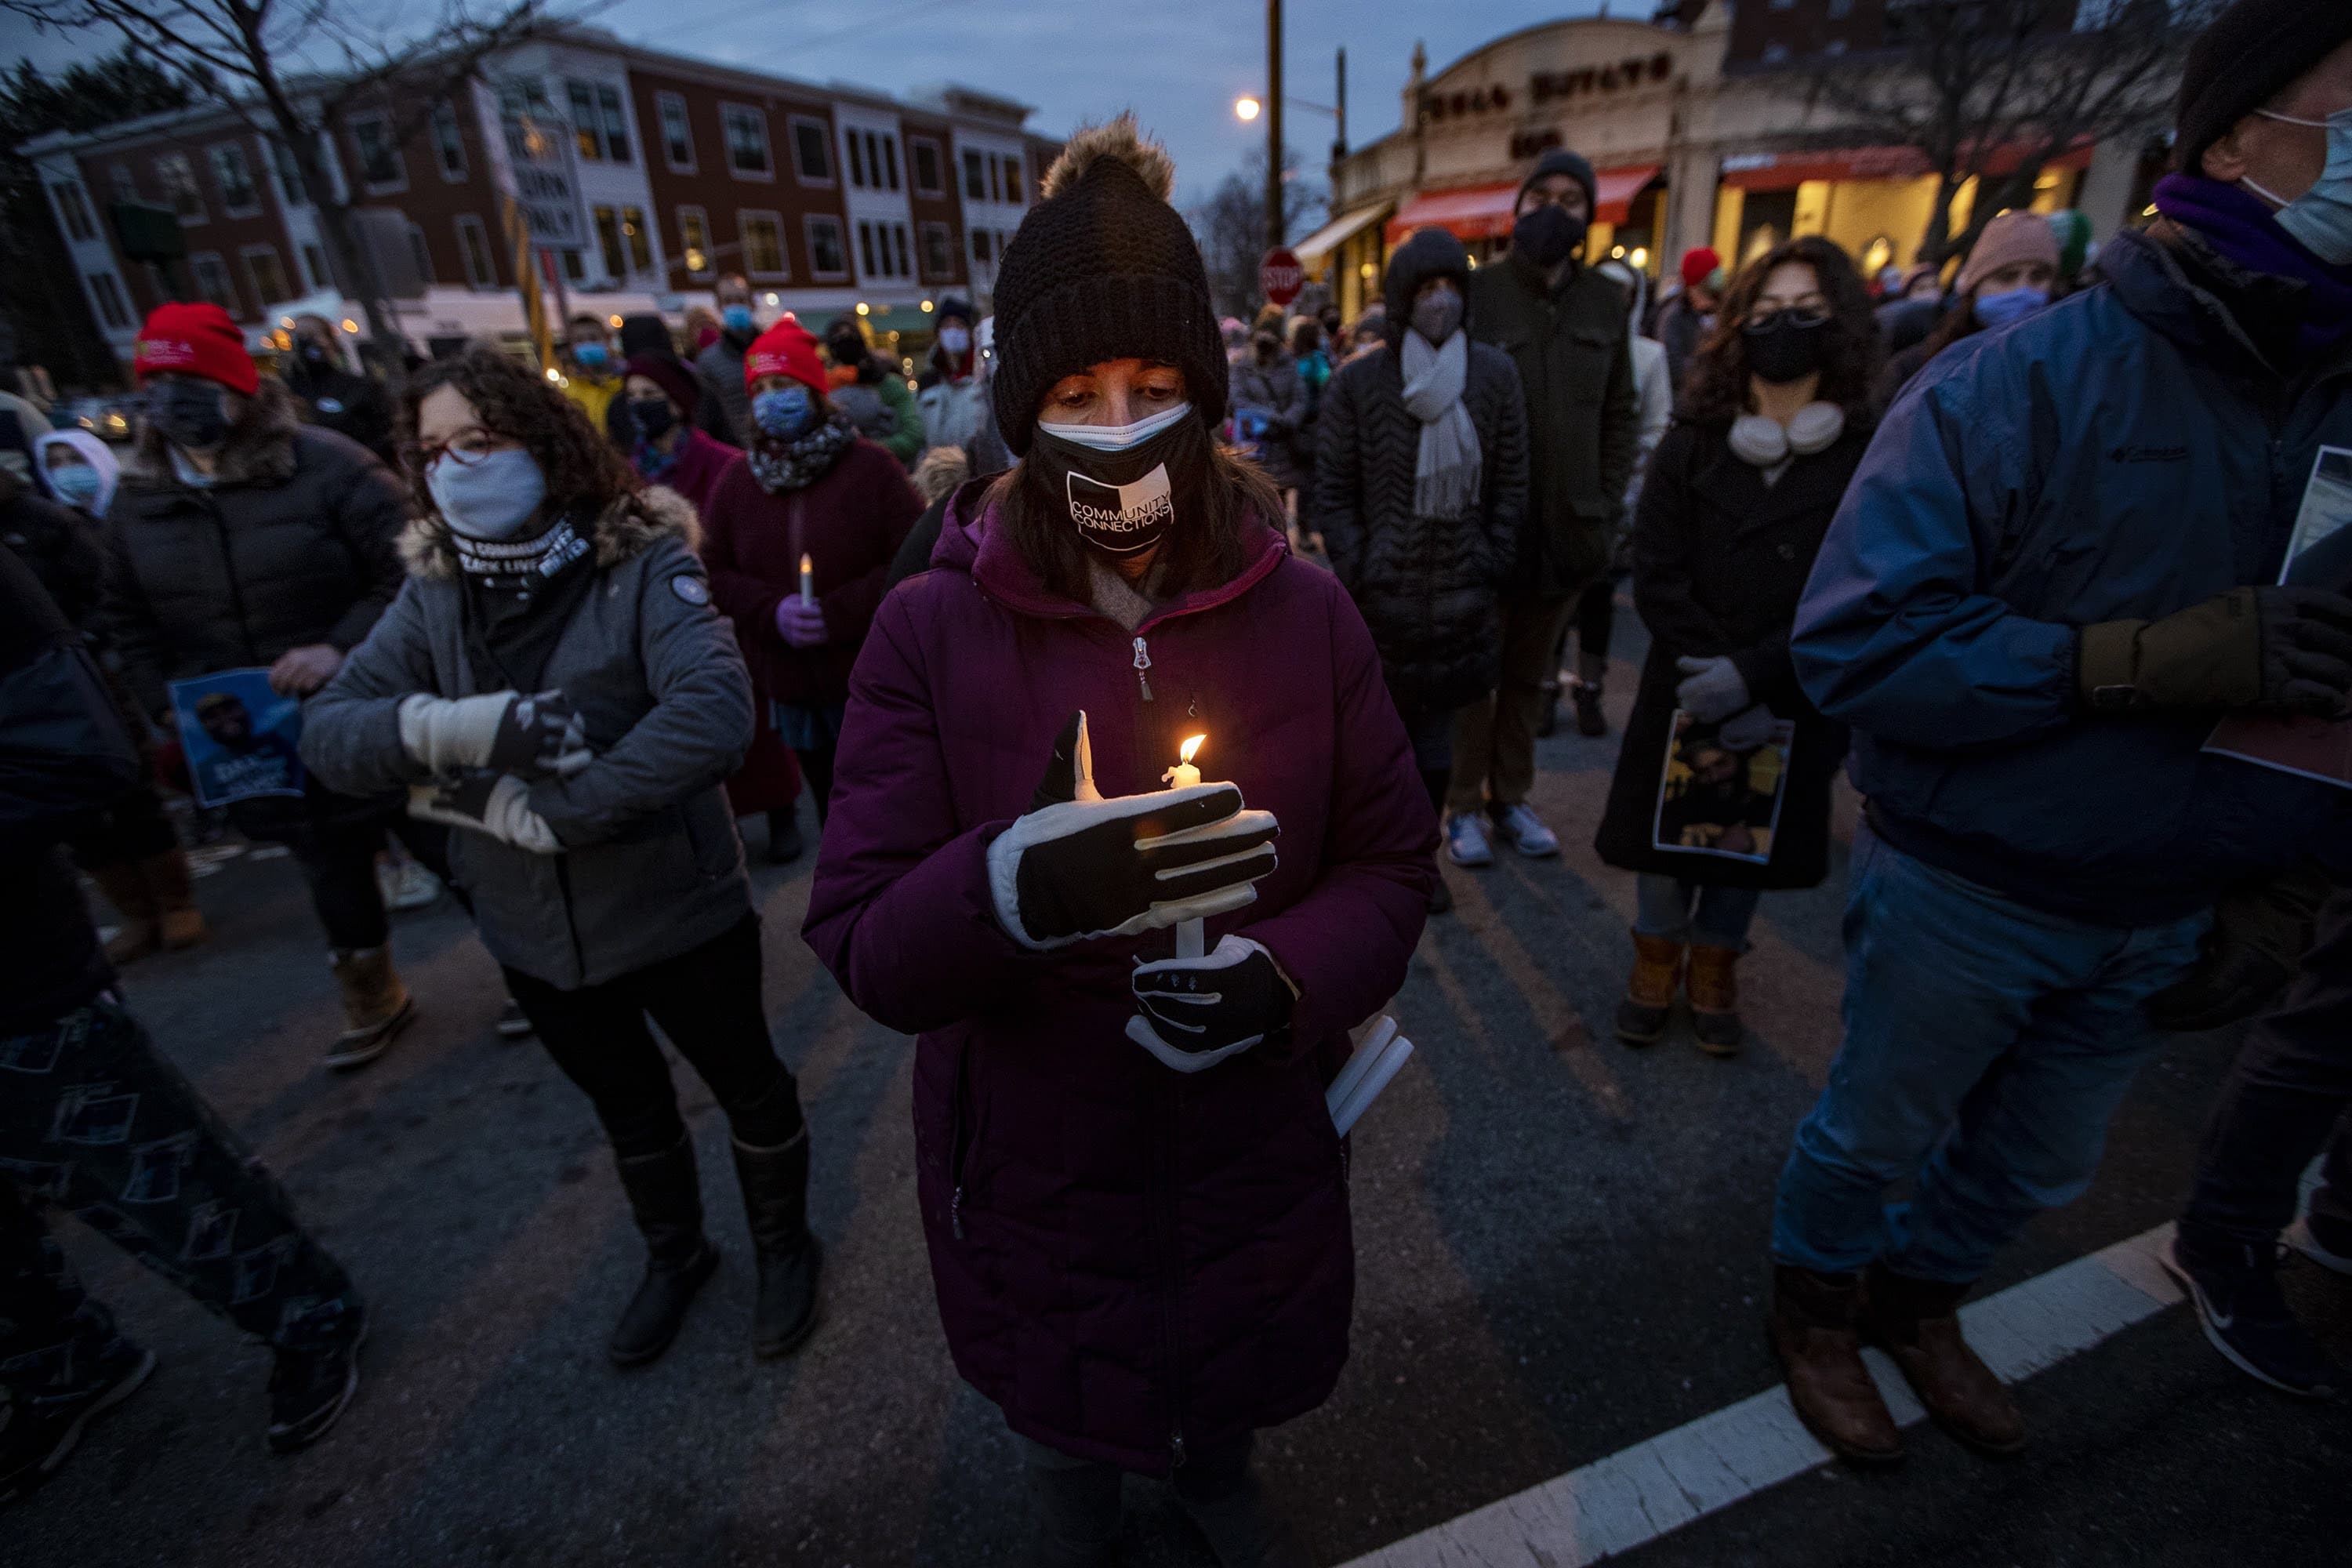 Hundreds gathered in Cushing Square in Belmont to honor the memory of Henry Tapia, two days after he had an altercation with a man who reportedly yelled racial slurs and then drove over him, ultimately killing Tapia. (Jesse Costa/WBUR)